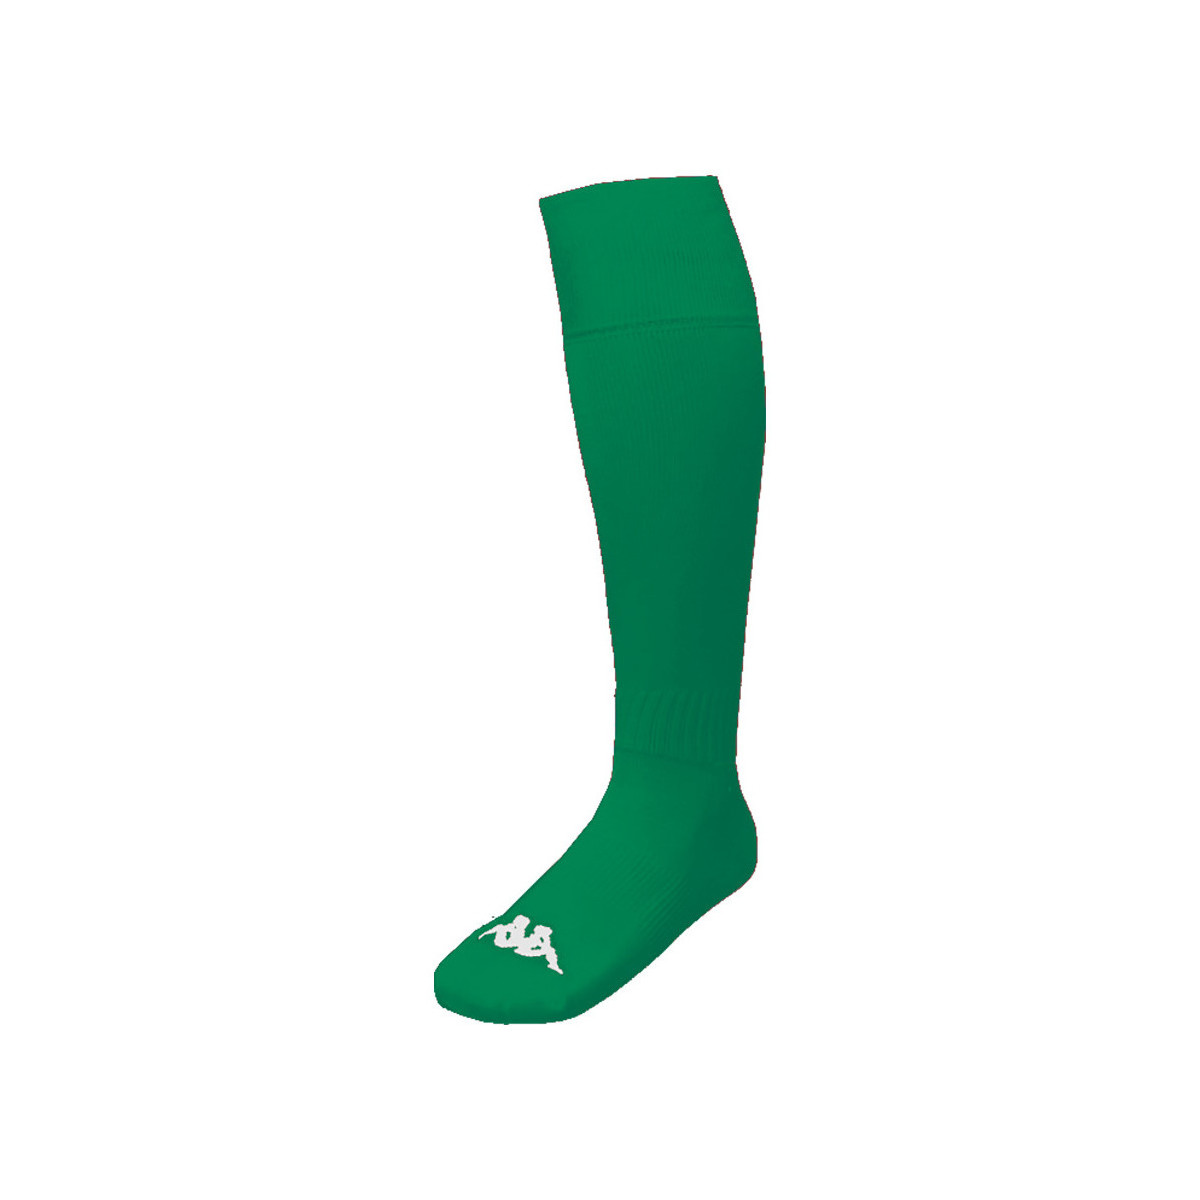 Kappa Vert Chaussettes Lyna (3 paires) fhimt7YN